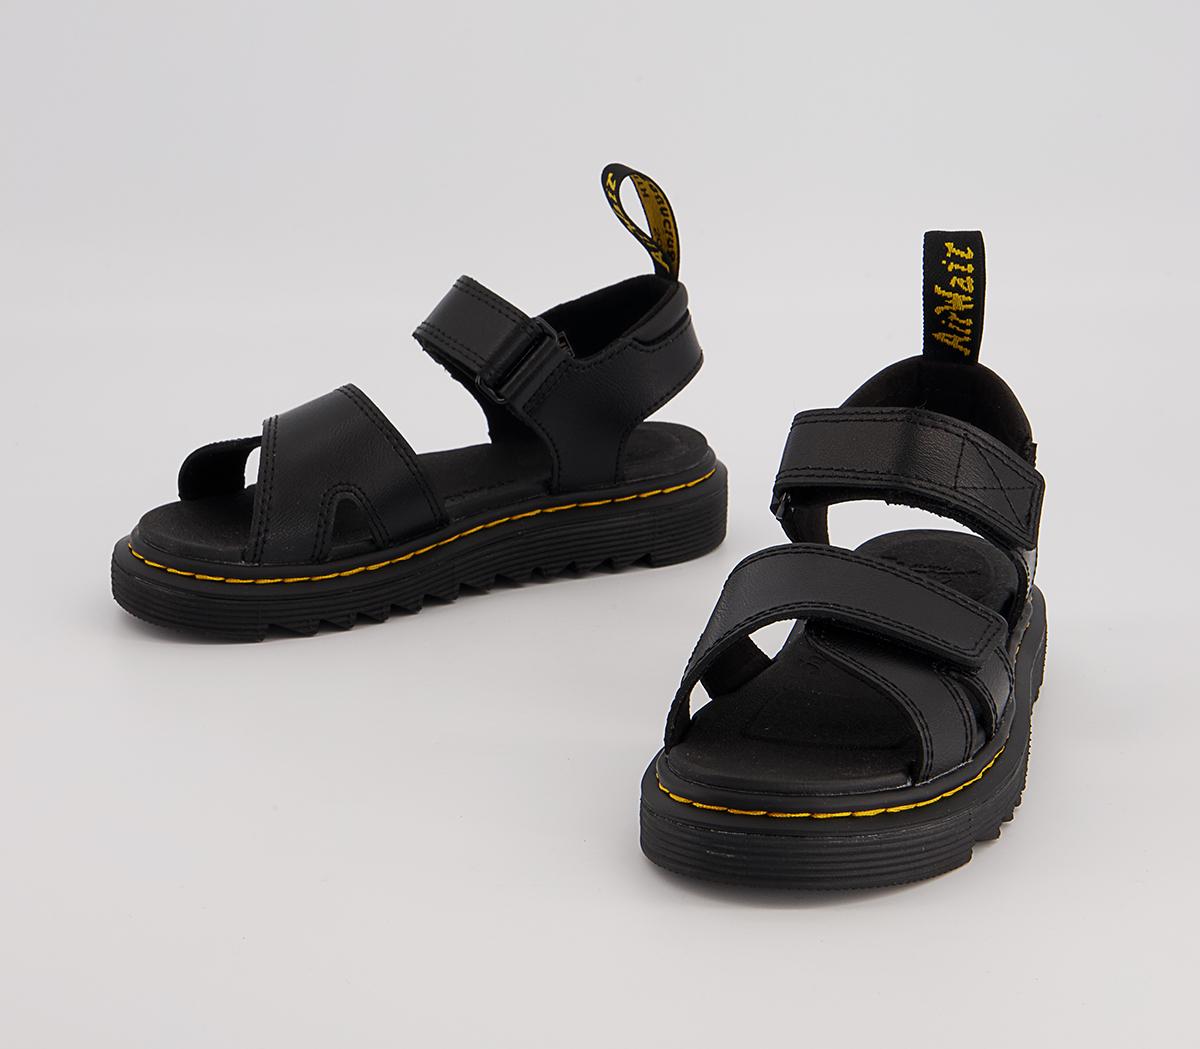 Dr. Martens Vossie Kids Sandals Black - Youth Trainers & Shoes